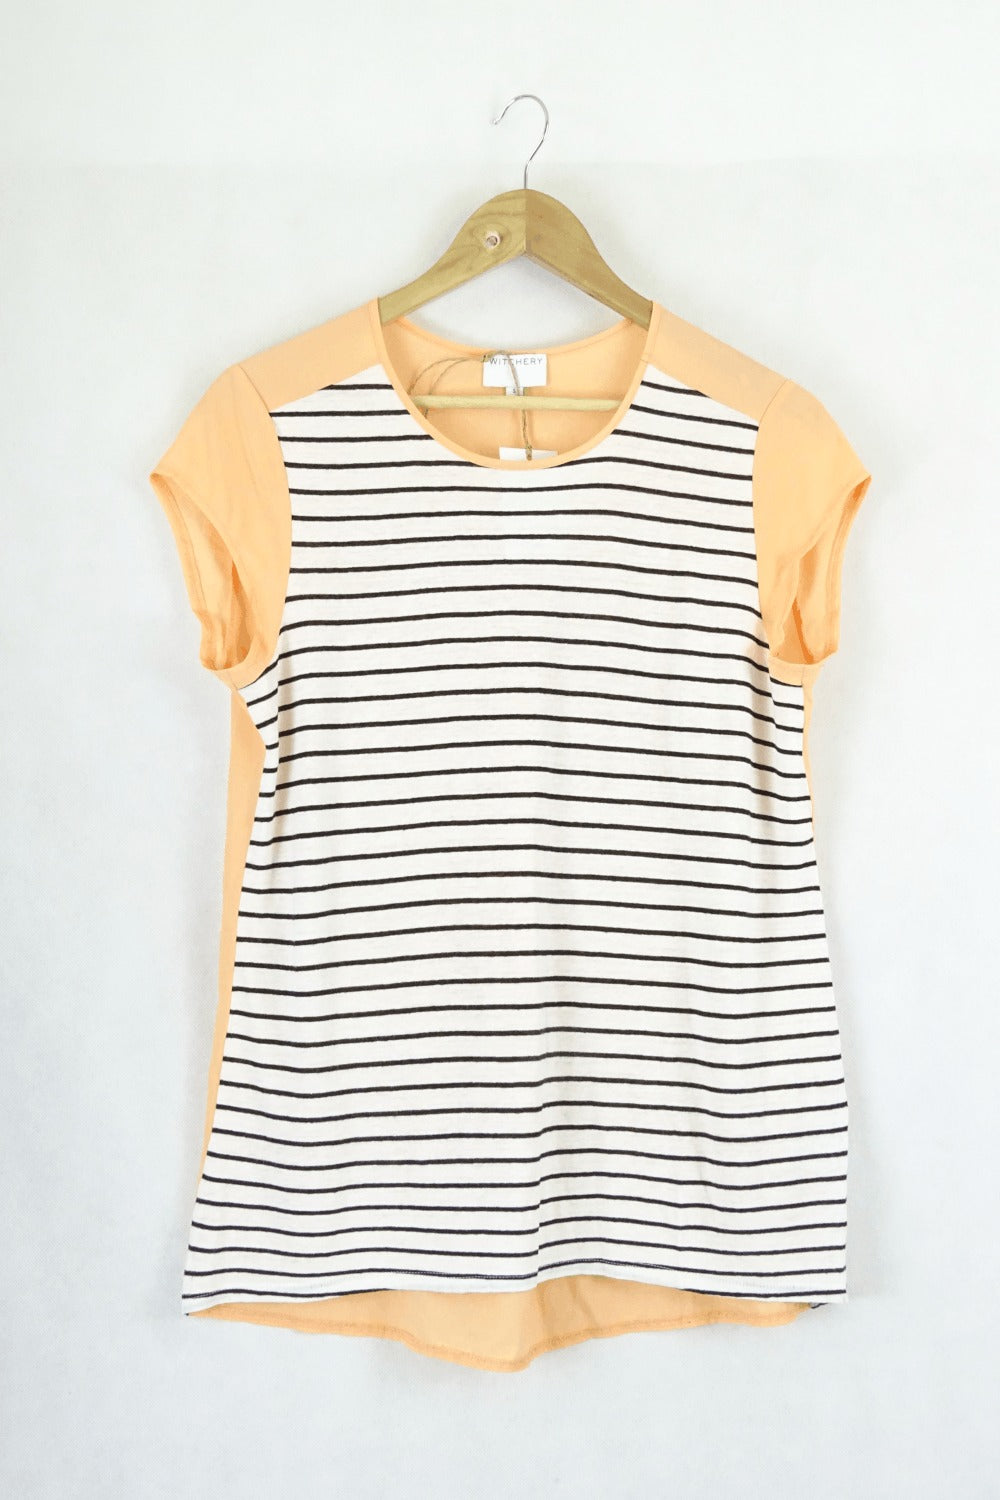 Witchery Black And White Striped T-Shirt S